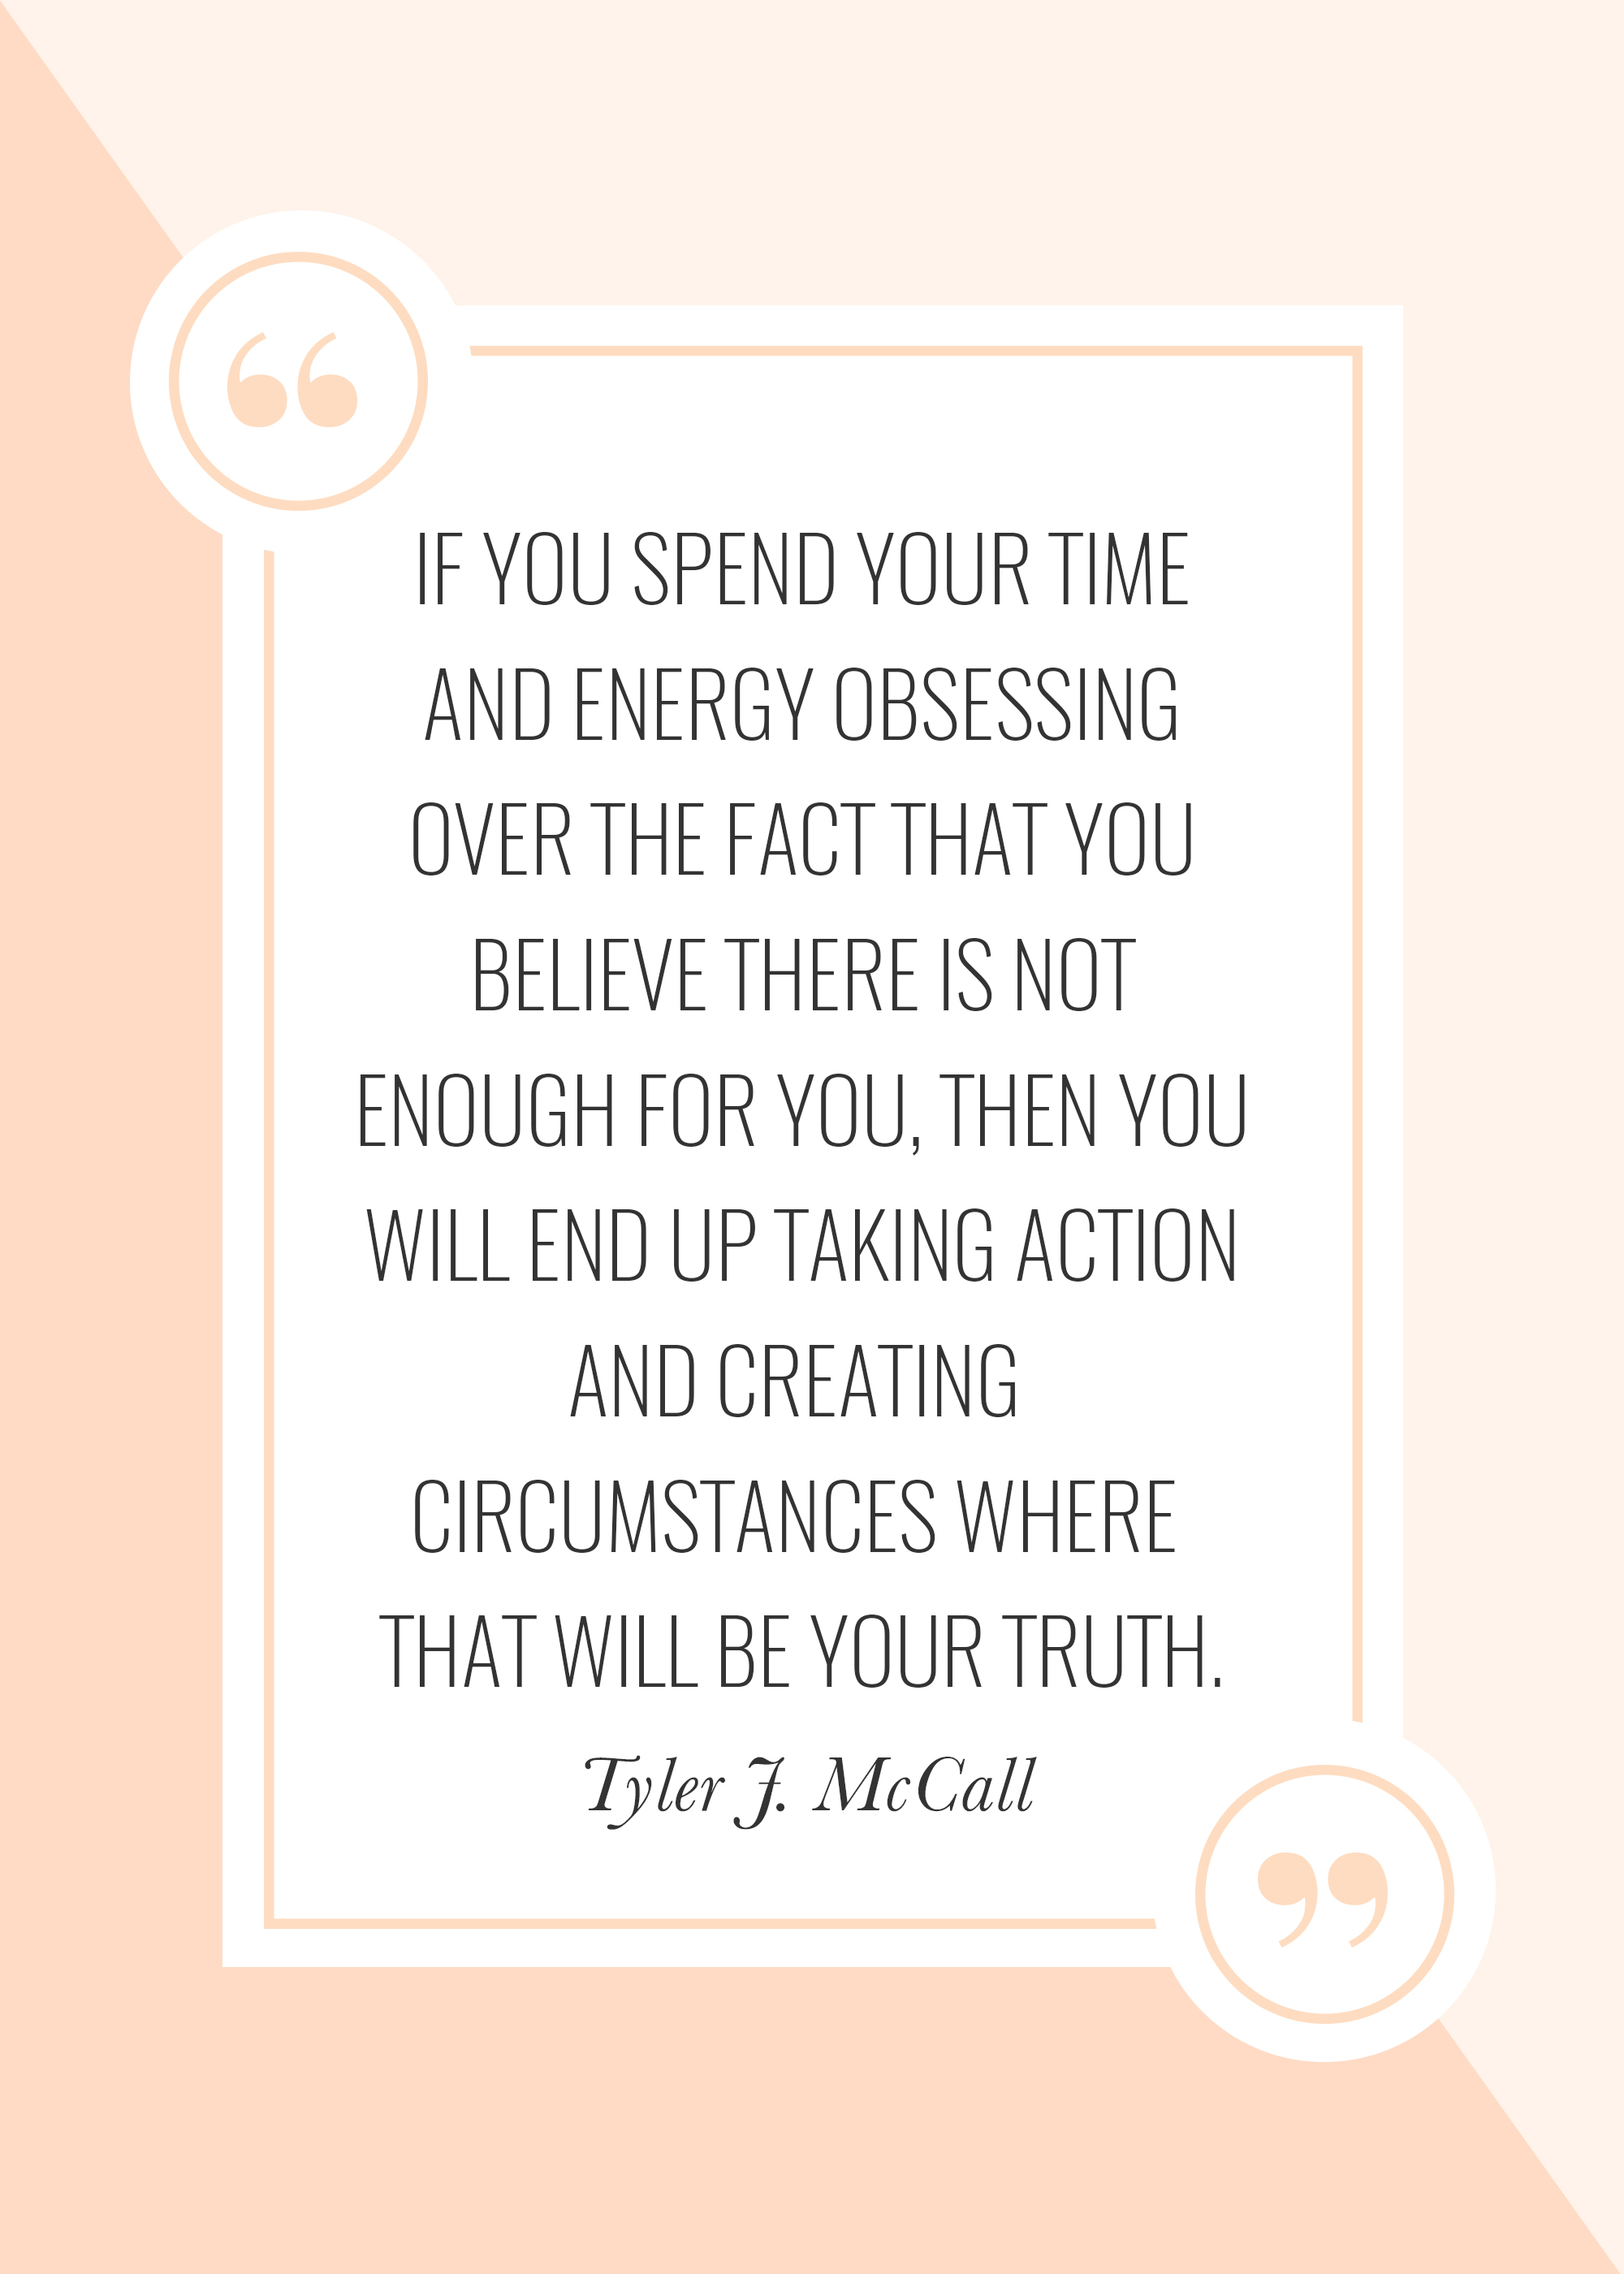 "If you spend your time and energy obsessing over the fact that you believe there is not enough for you, then you will end up taking action and creating circumstances where that will be your truth." -- Tyler J. McCall on scarcity mindset on The Power in Purpose Podcast